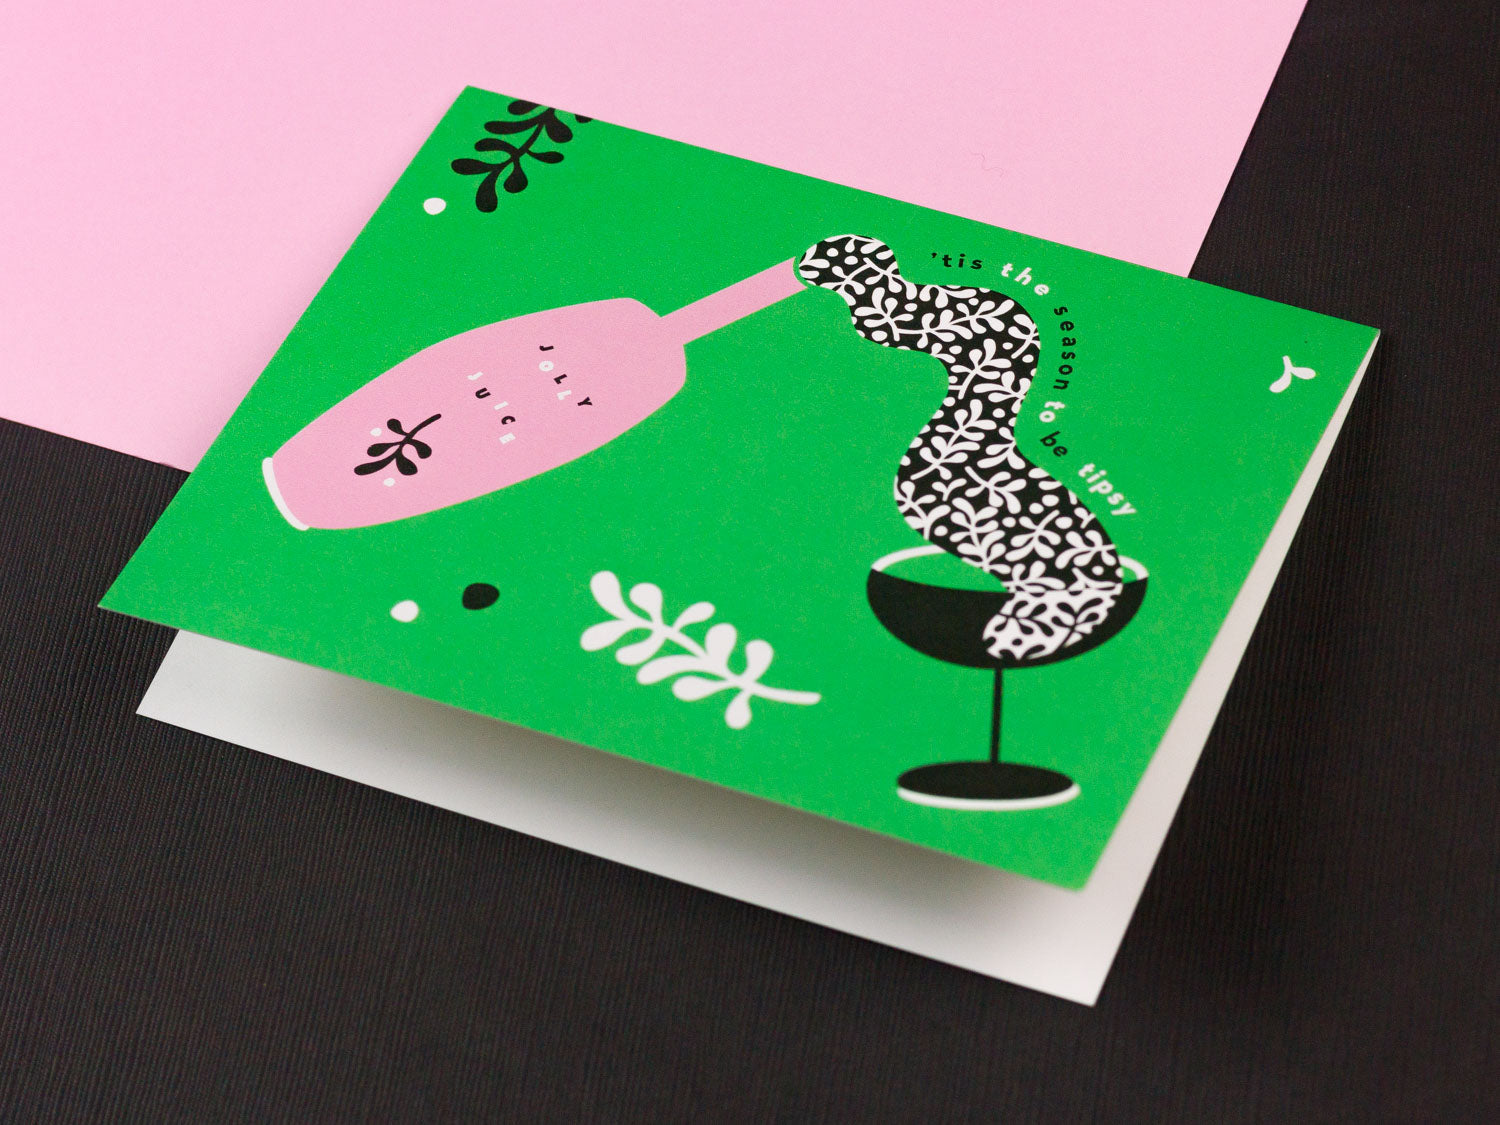 'Tis the Season to Be Tipsy Holiday Card, collaboration between Etsy and Match.com. Designed by @mydarlin_bk